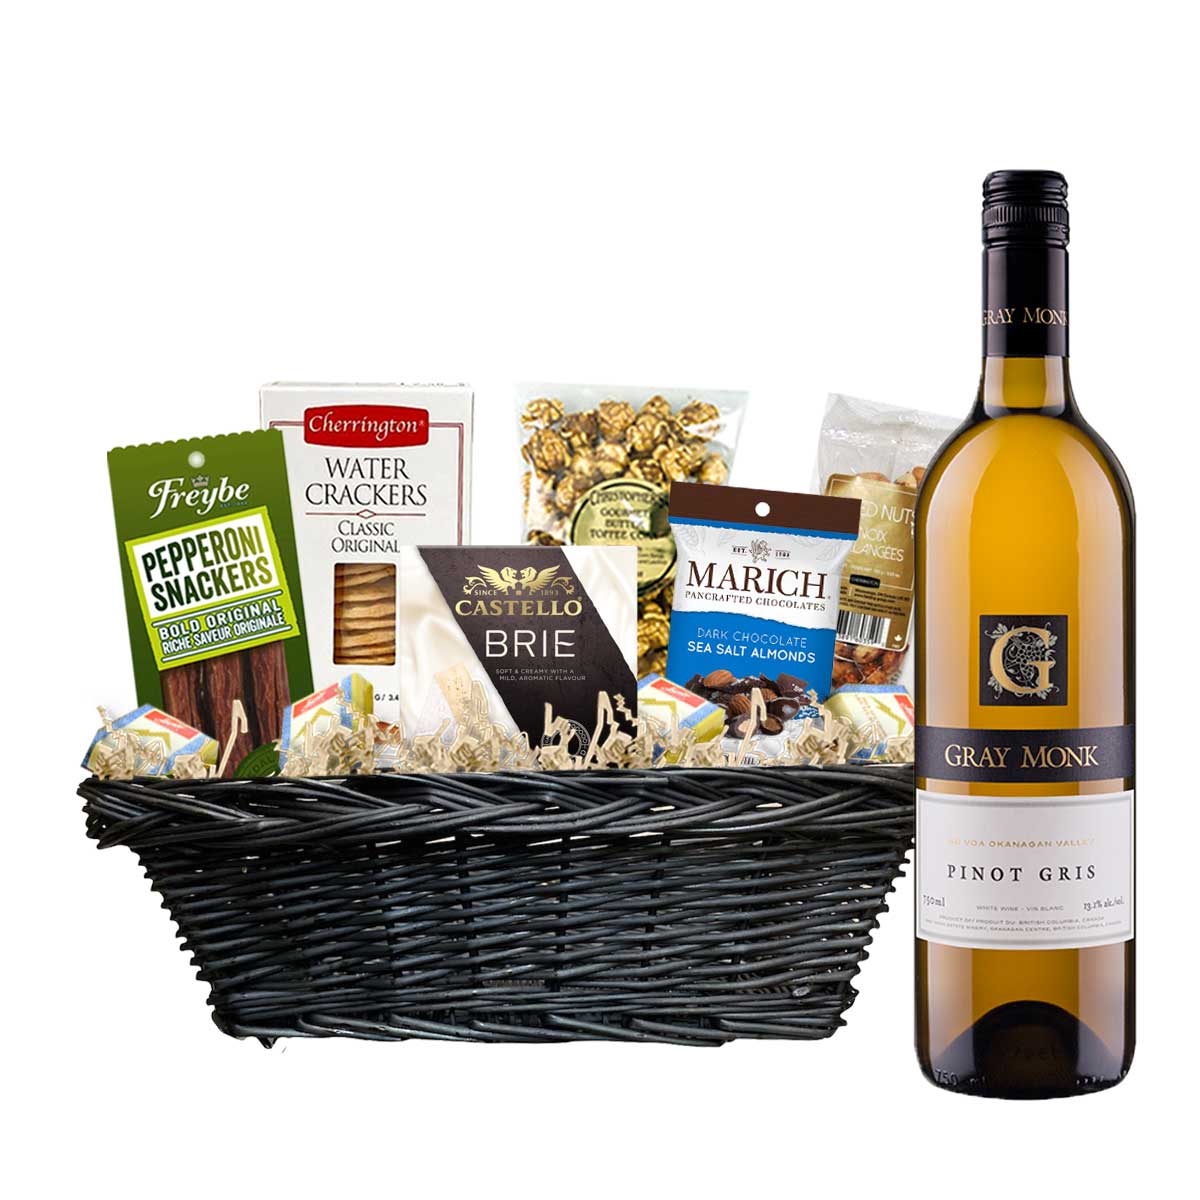 TAG Liquor Stores Canada Delivery-Gray Monk Pinot Gris 750ml Corporate Gift Basket-wine-tagliquorstores.com